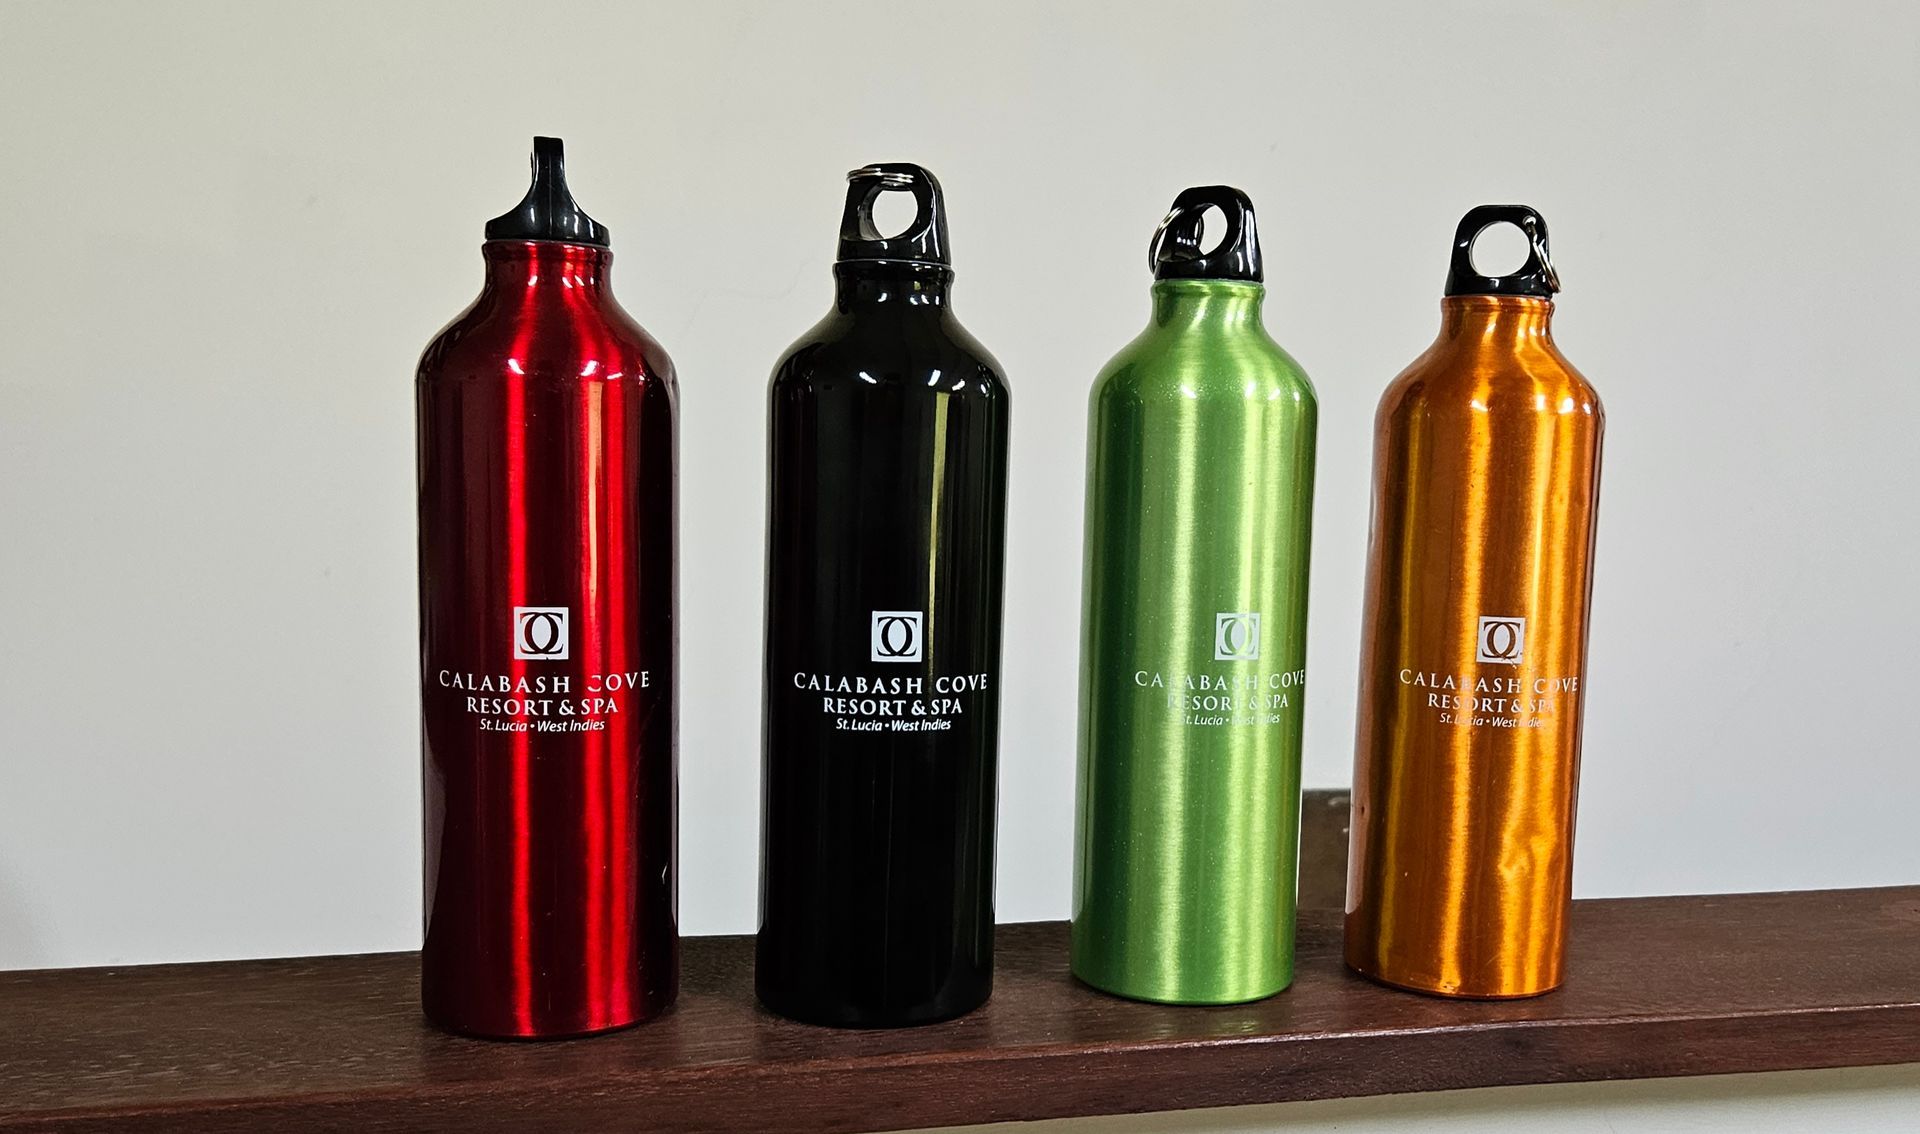 Water bottles used in place of plastic